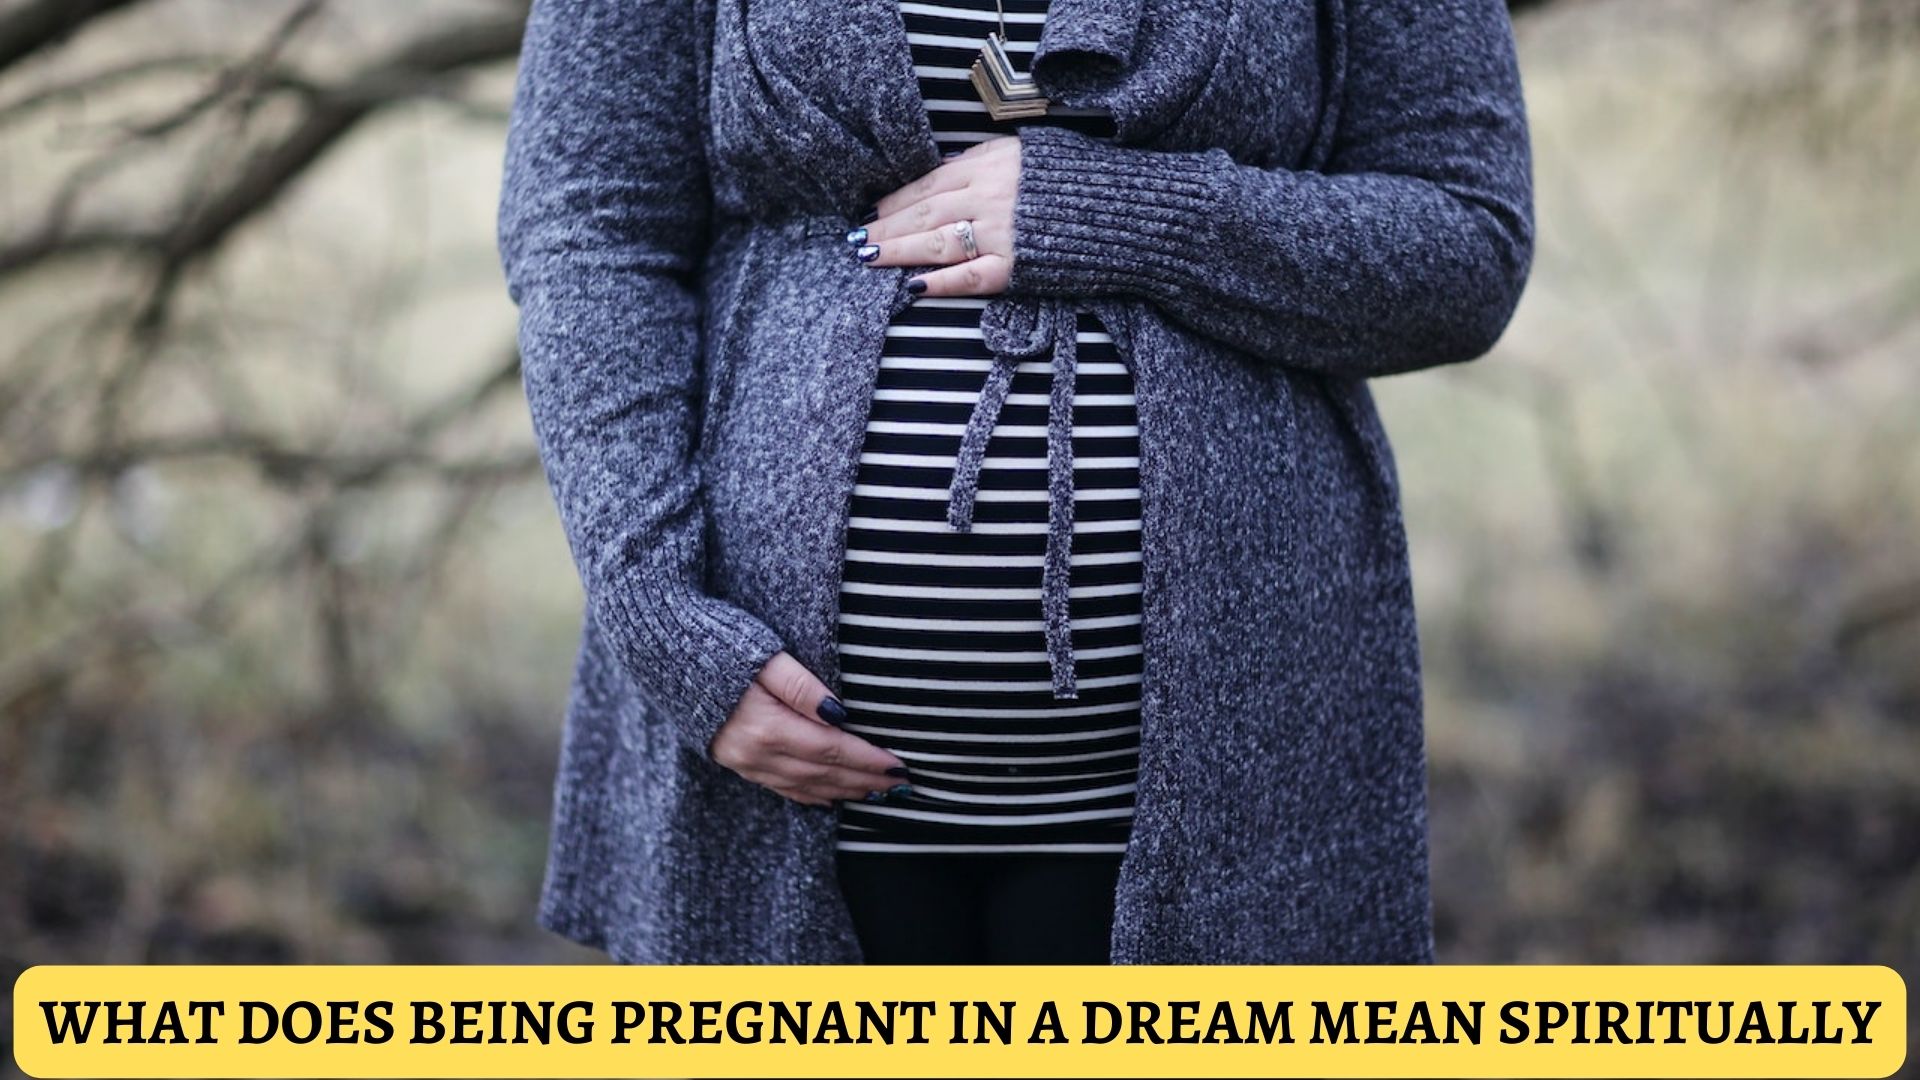 What Does Being Pregnant In A Dream Mean Spiritually?